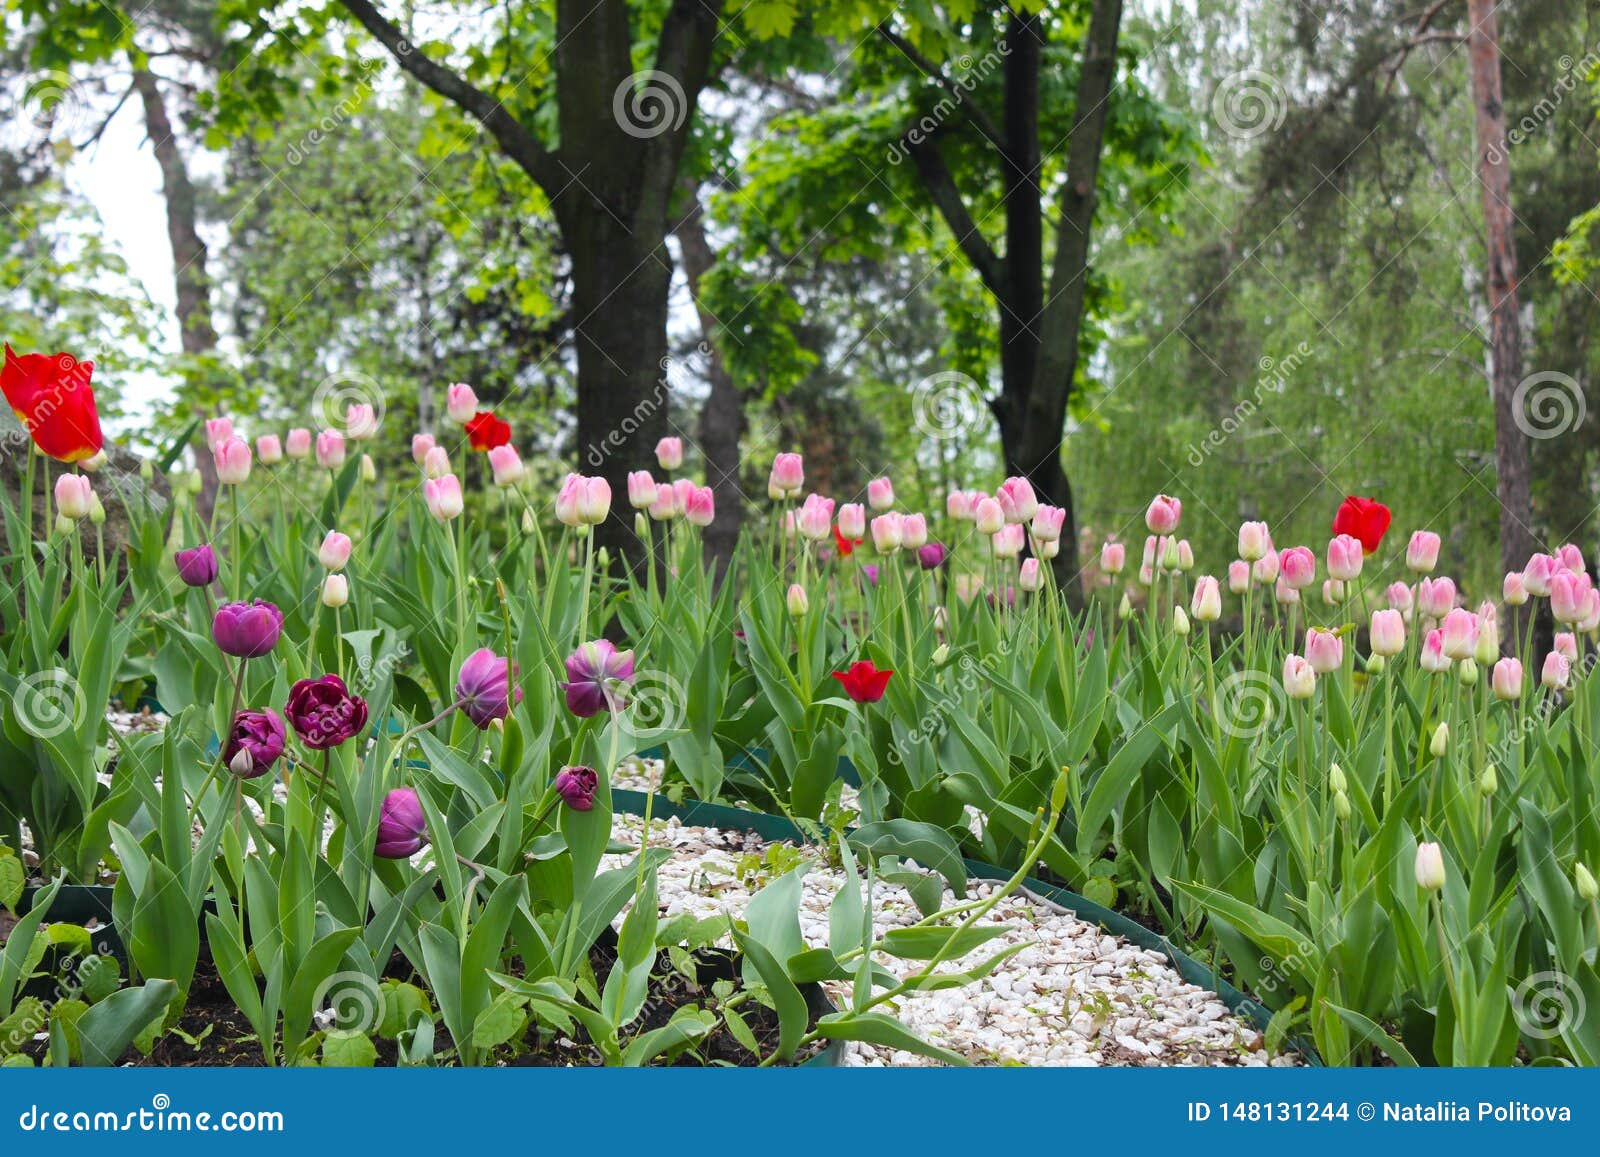 Stone Tile Garden  Path  With Blooming Red Tulips  By The 